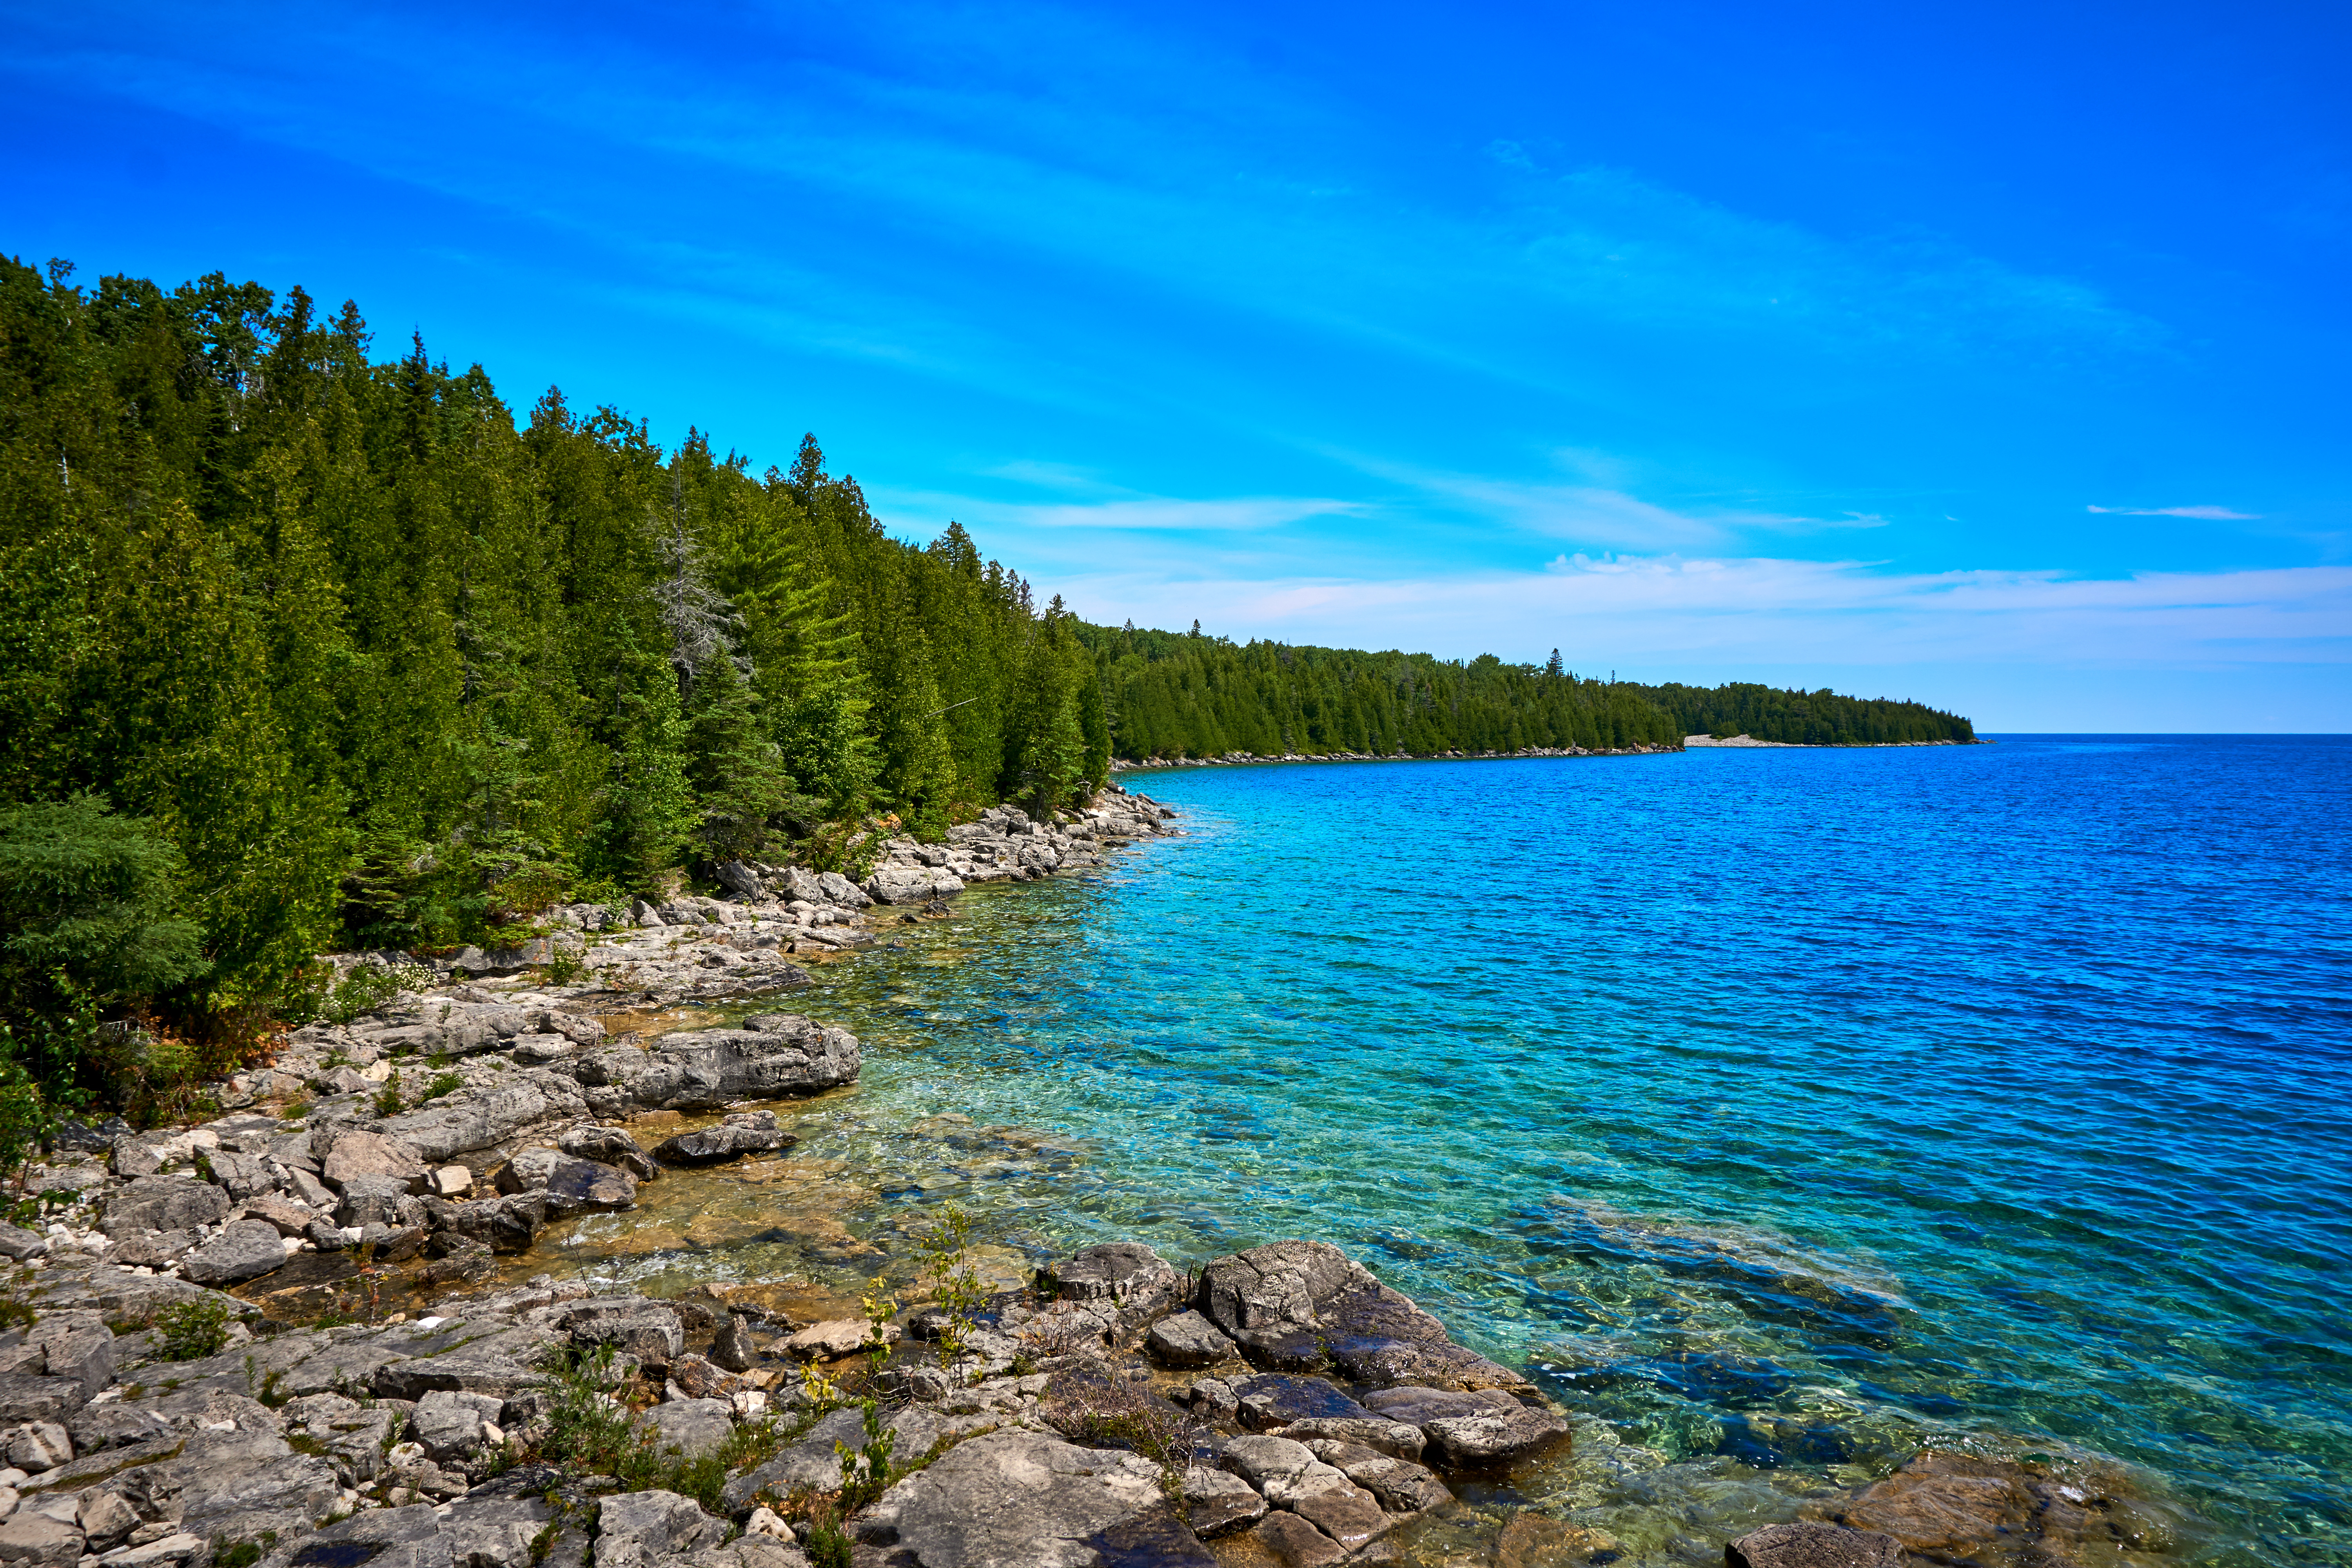 A view of Bruce Peninsula National Park